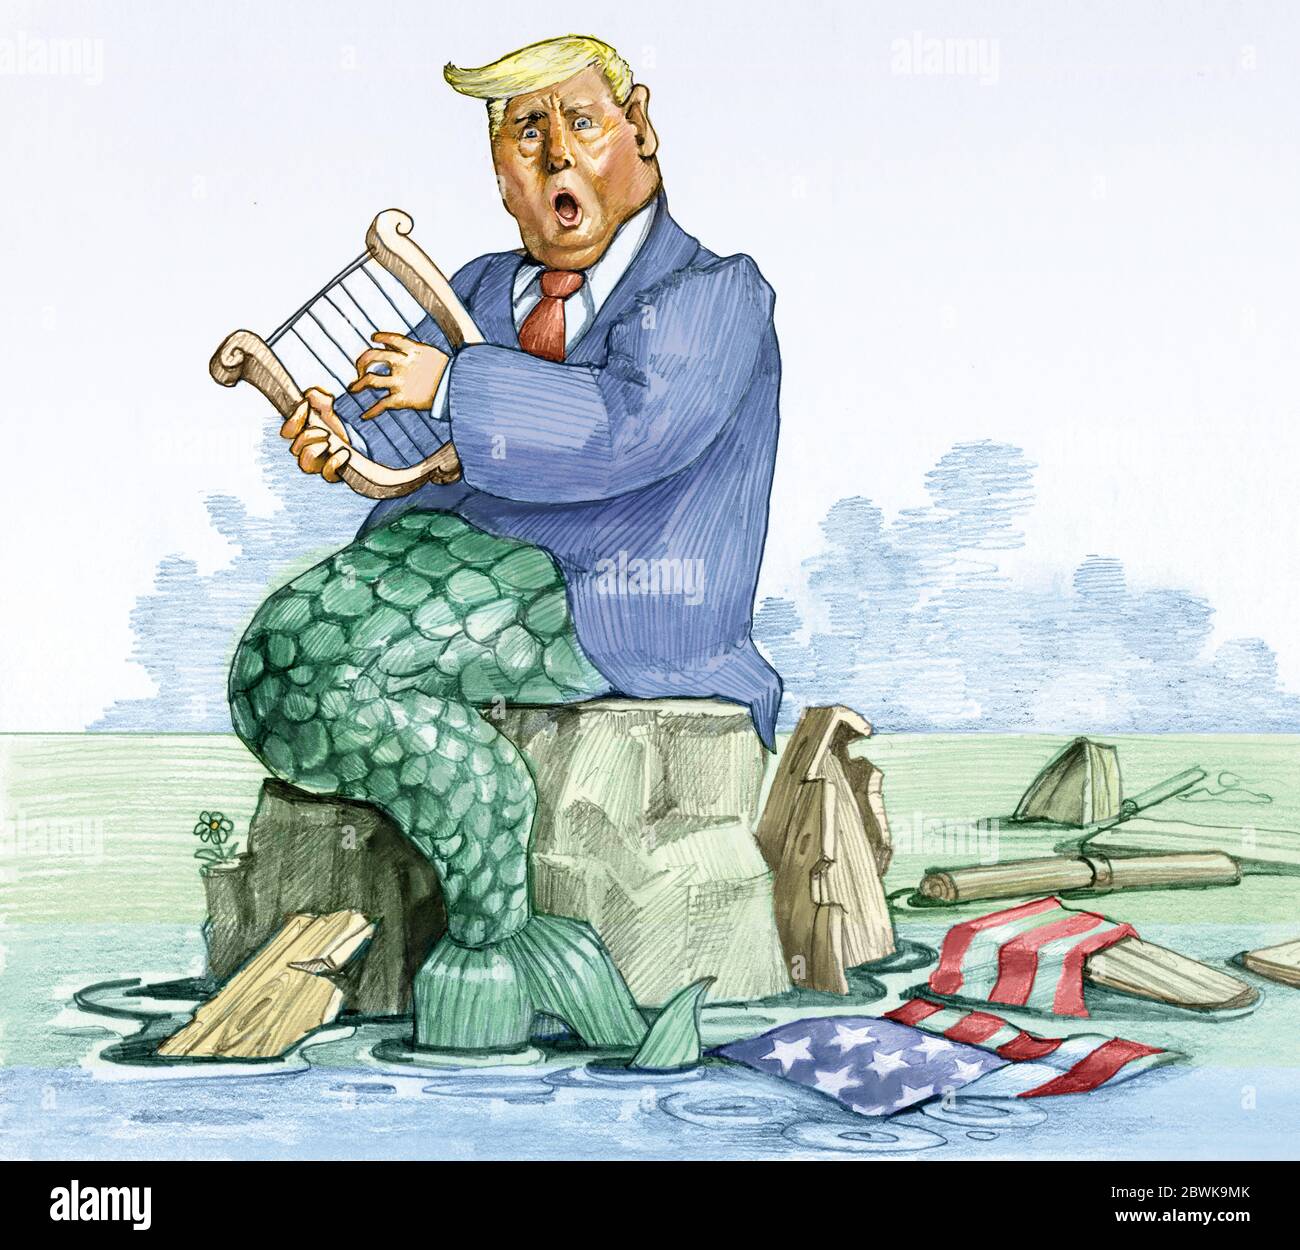 trump is a mermaid the boat with the American flag broke on the cliff a metaphor for the destruction that this president is bringing to his country Stock Photo